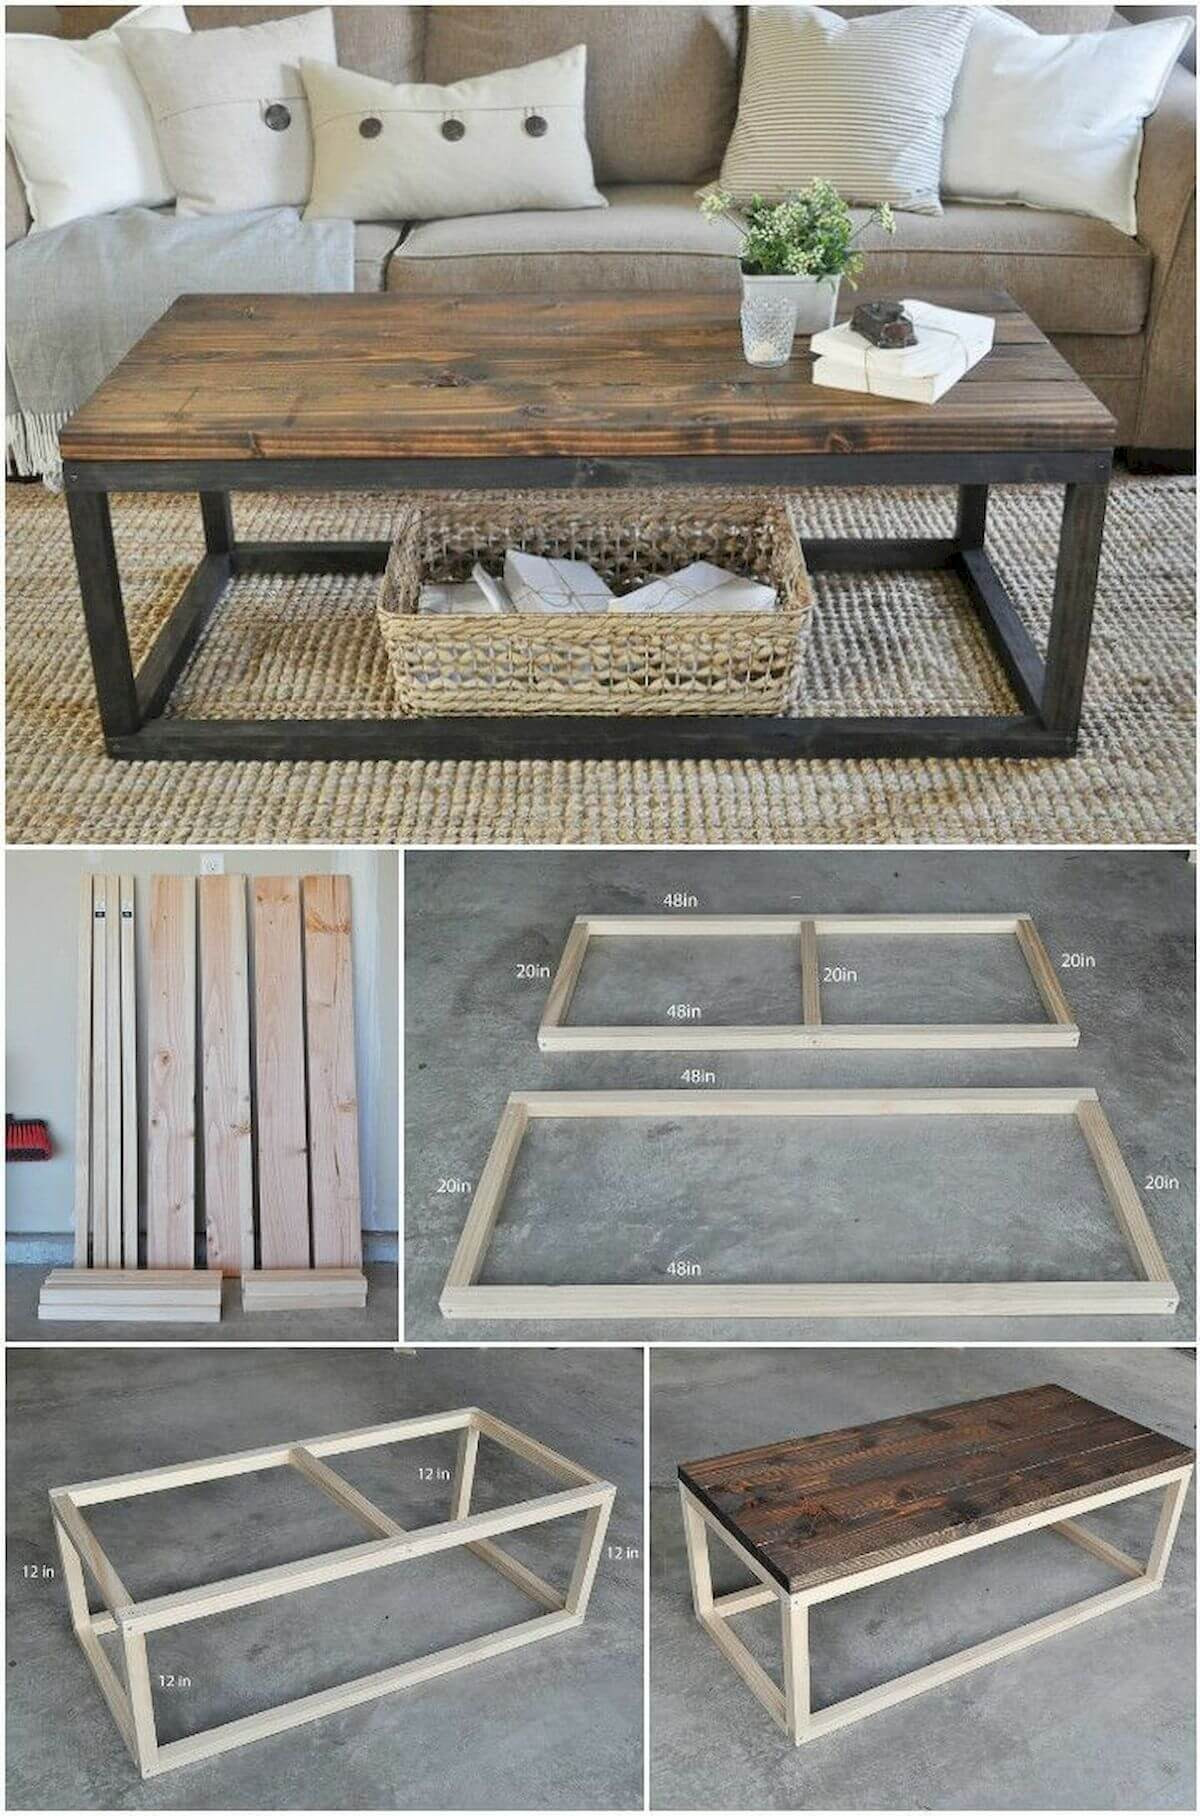 DIY Wood Coffee Table
 20 DIY Furniture And Woodworking Projects Engineering